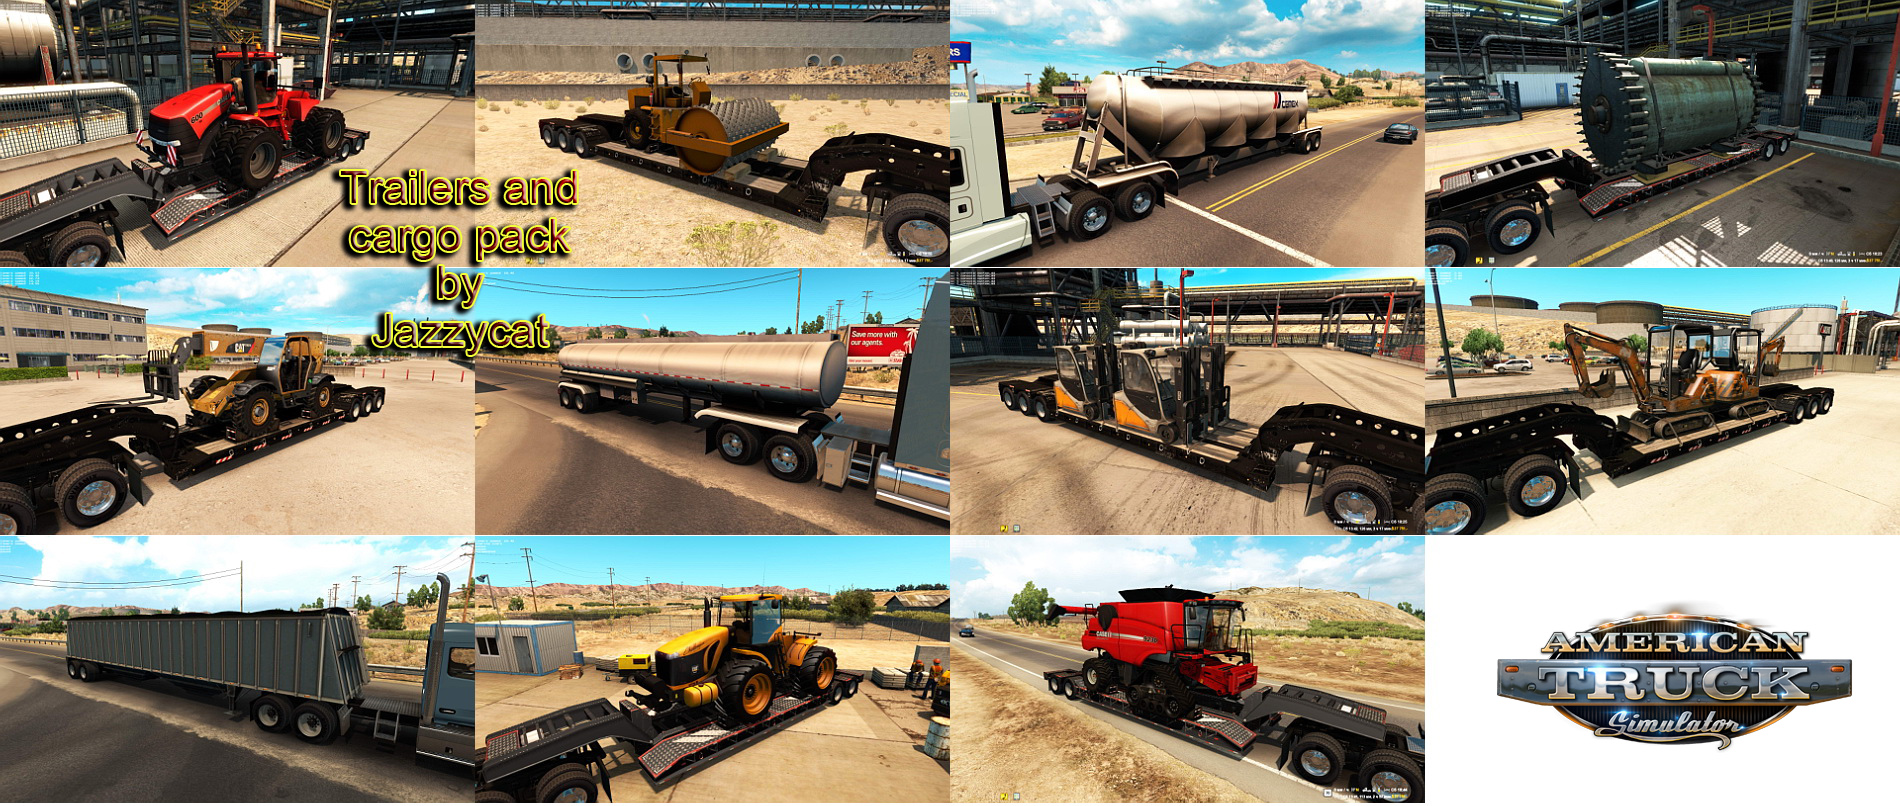 trailers_and_cargo_pack_by_Jazzycat_v1.0.jpg